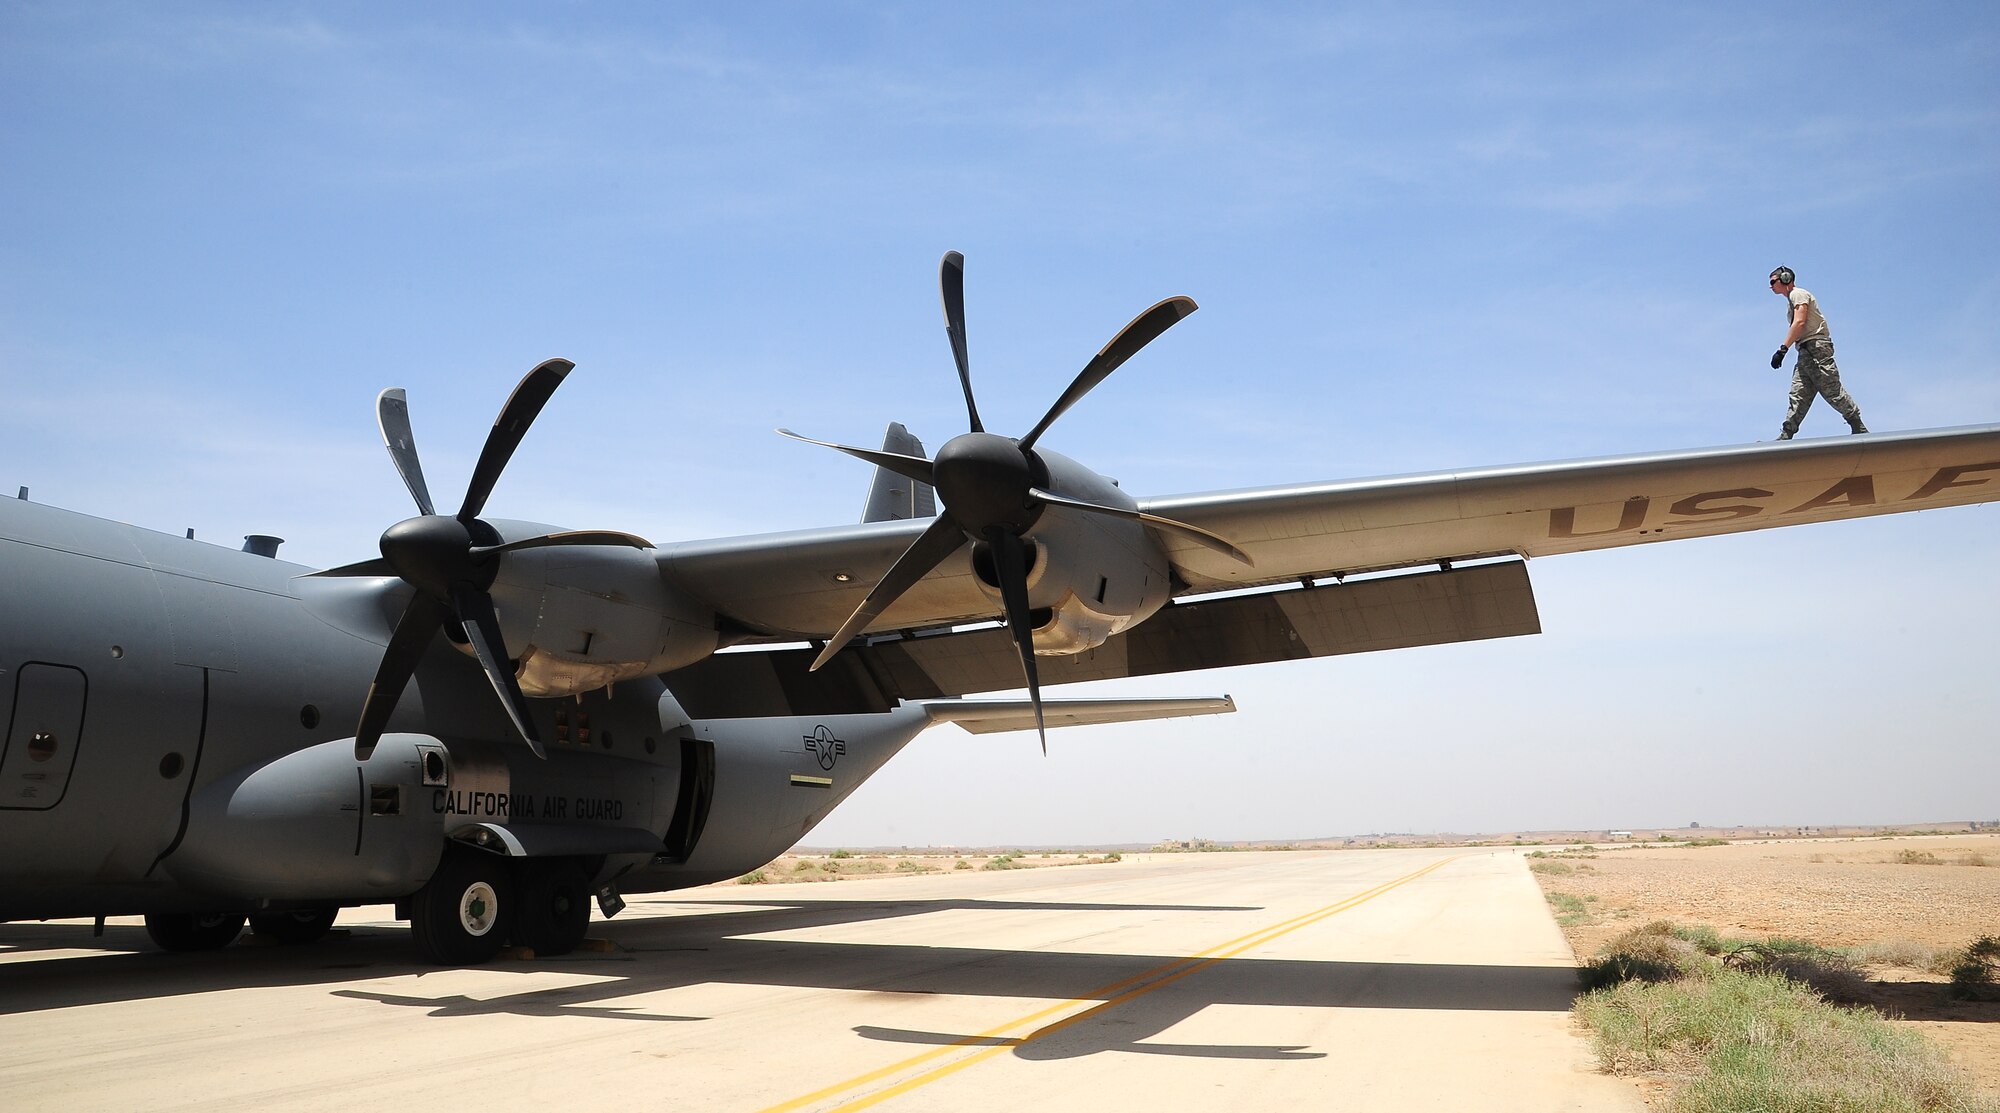 U.S. Air Force Senior Airman Beau Lewis, a crew chief with the 146th Aircraft Maintenance Squadron at Channel Islands Air National Guard Station, Calif., walks along the wing of a C-130J Hercules during Exercise Eager Lion May 29, 2014, at an air base in northern Jordan. During Eager Lion, the C-130s added another dimension to exercise scenarios, which included providing humanitarian assistance and disaster relief. (U.S. Air Force photo by Staff Sgt. Brigitte N. Brantley/Released)